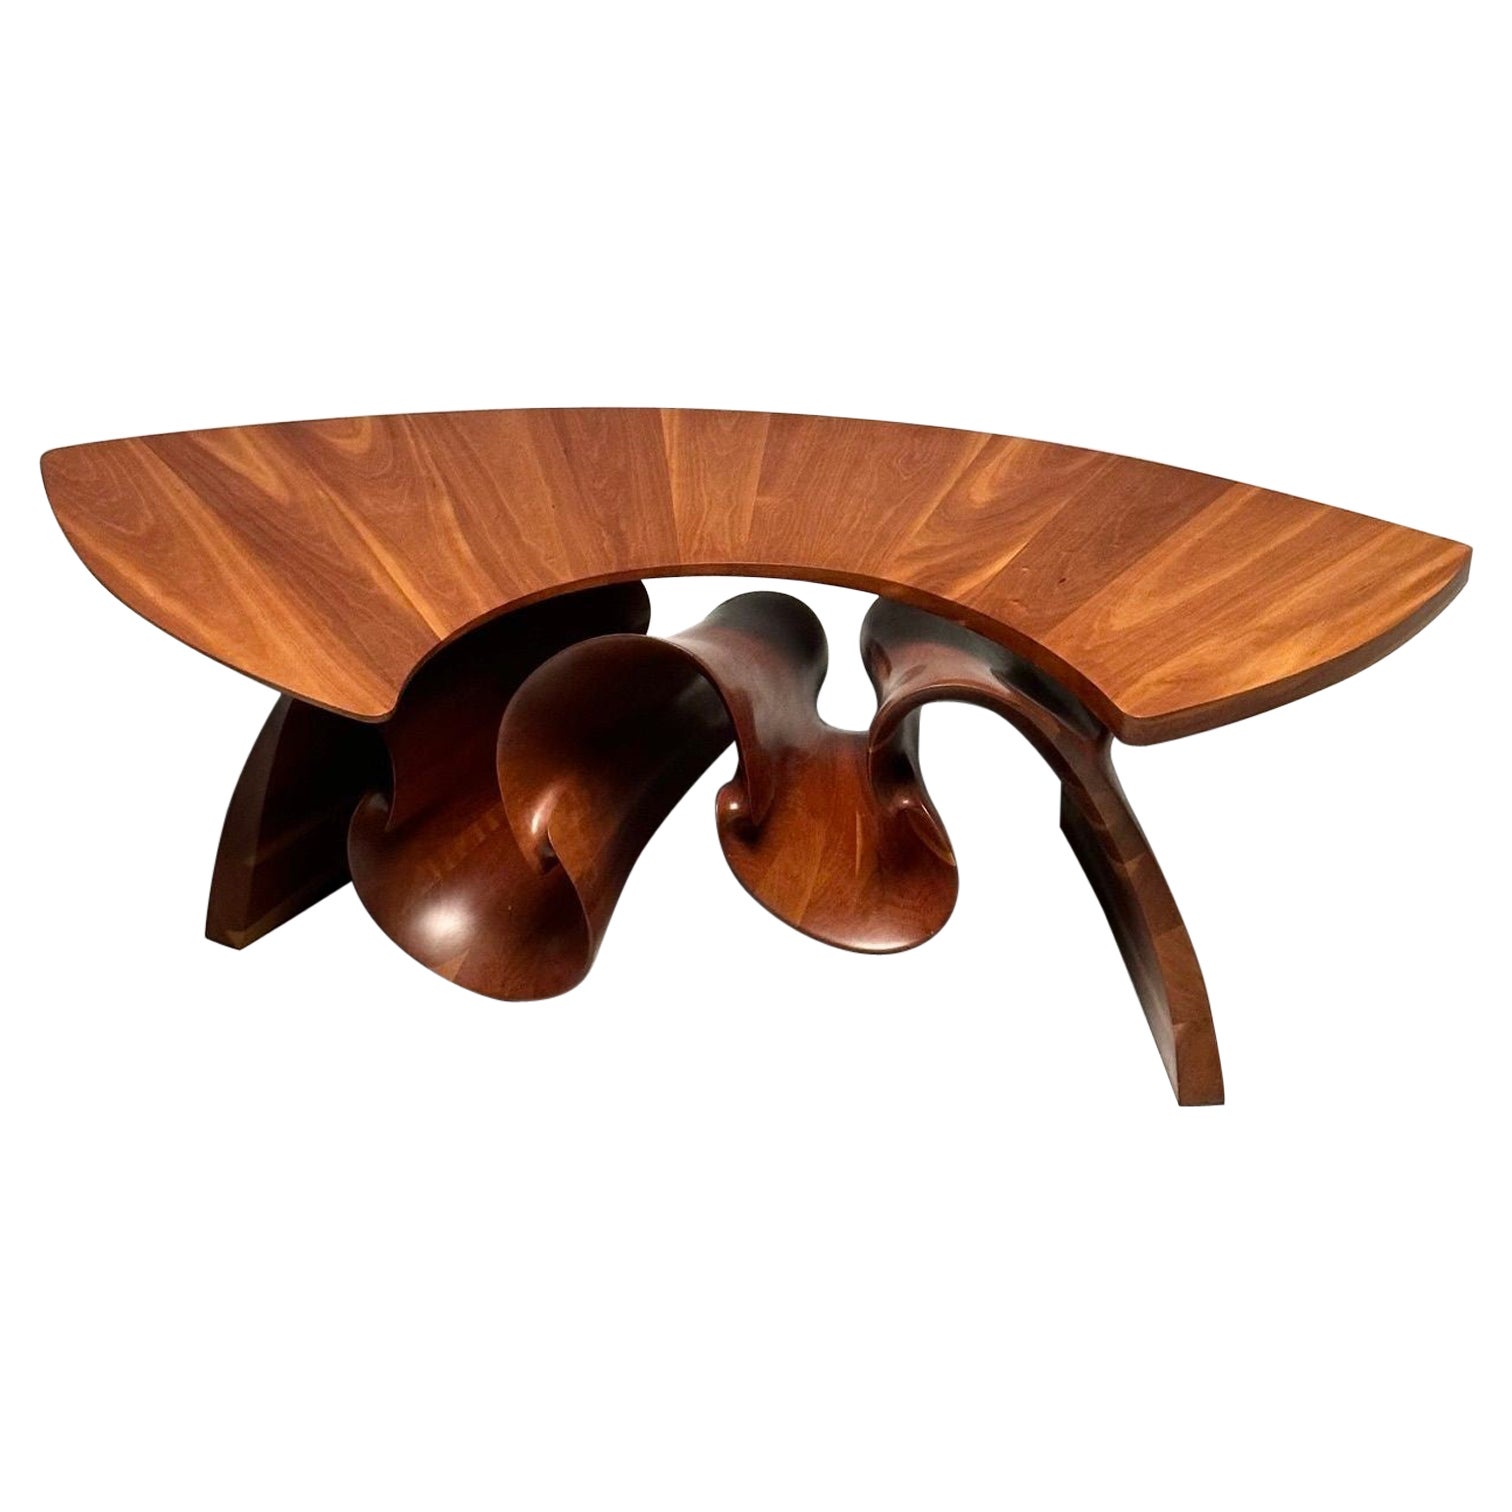 Peter Michael Adams, Mid-Century, Sculptural Coffee Table, Walnut, USA, 1970s For Sale